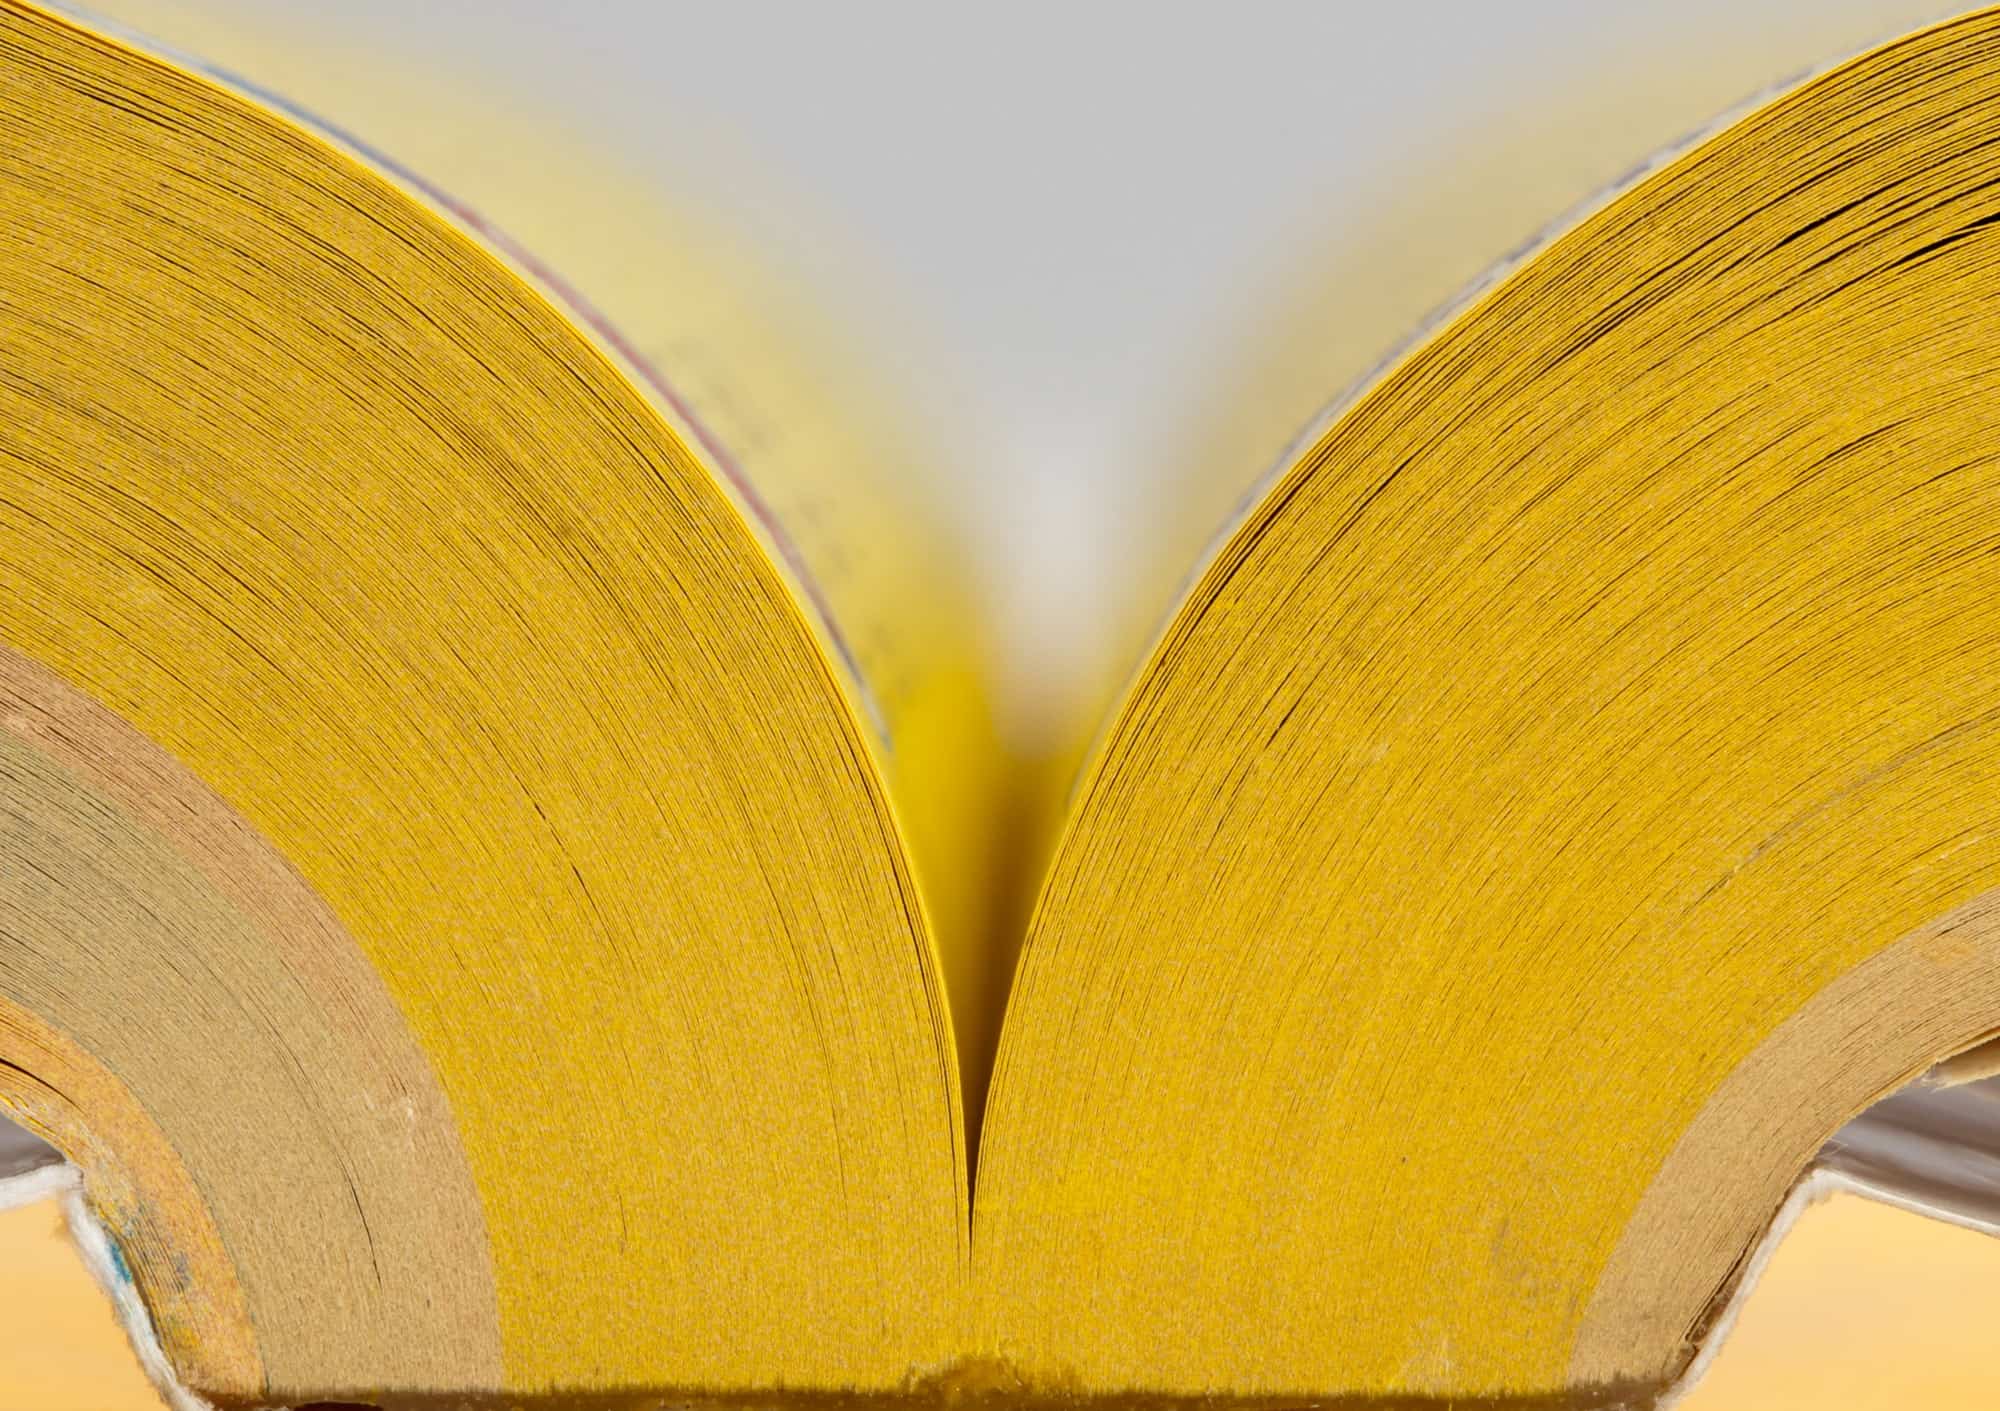 Open yellow pages book